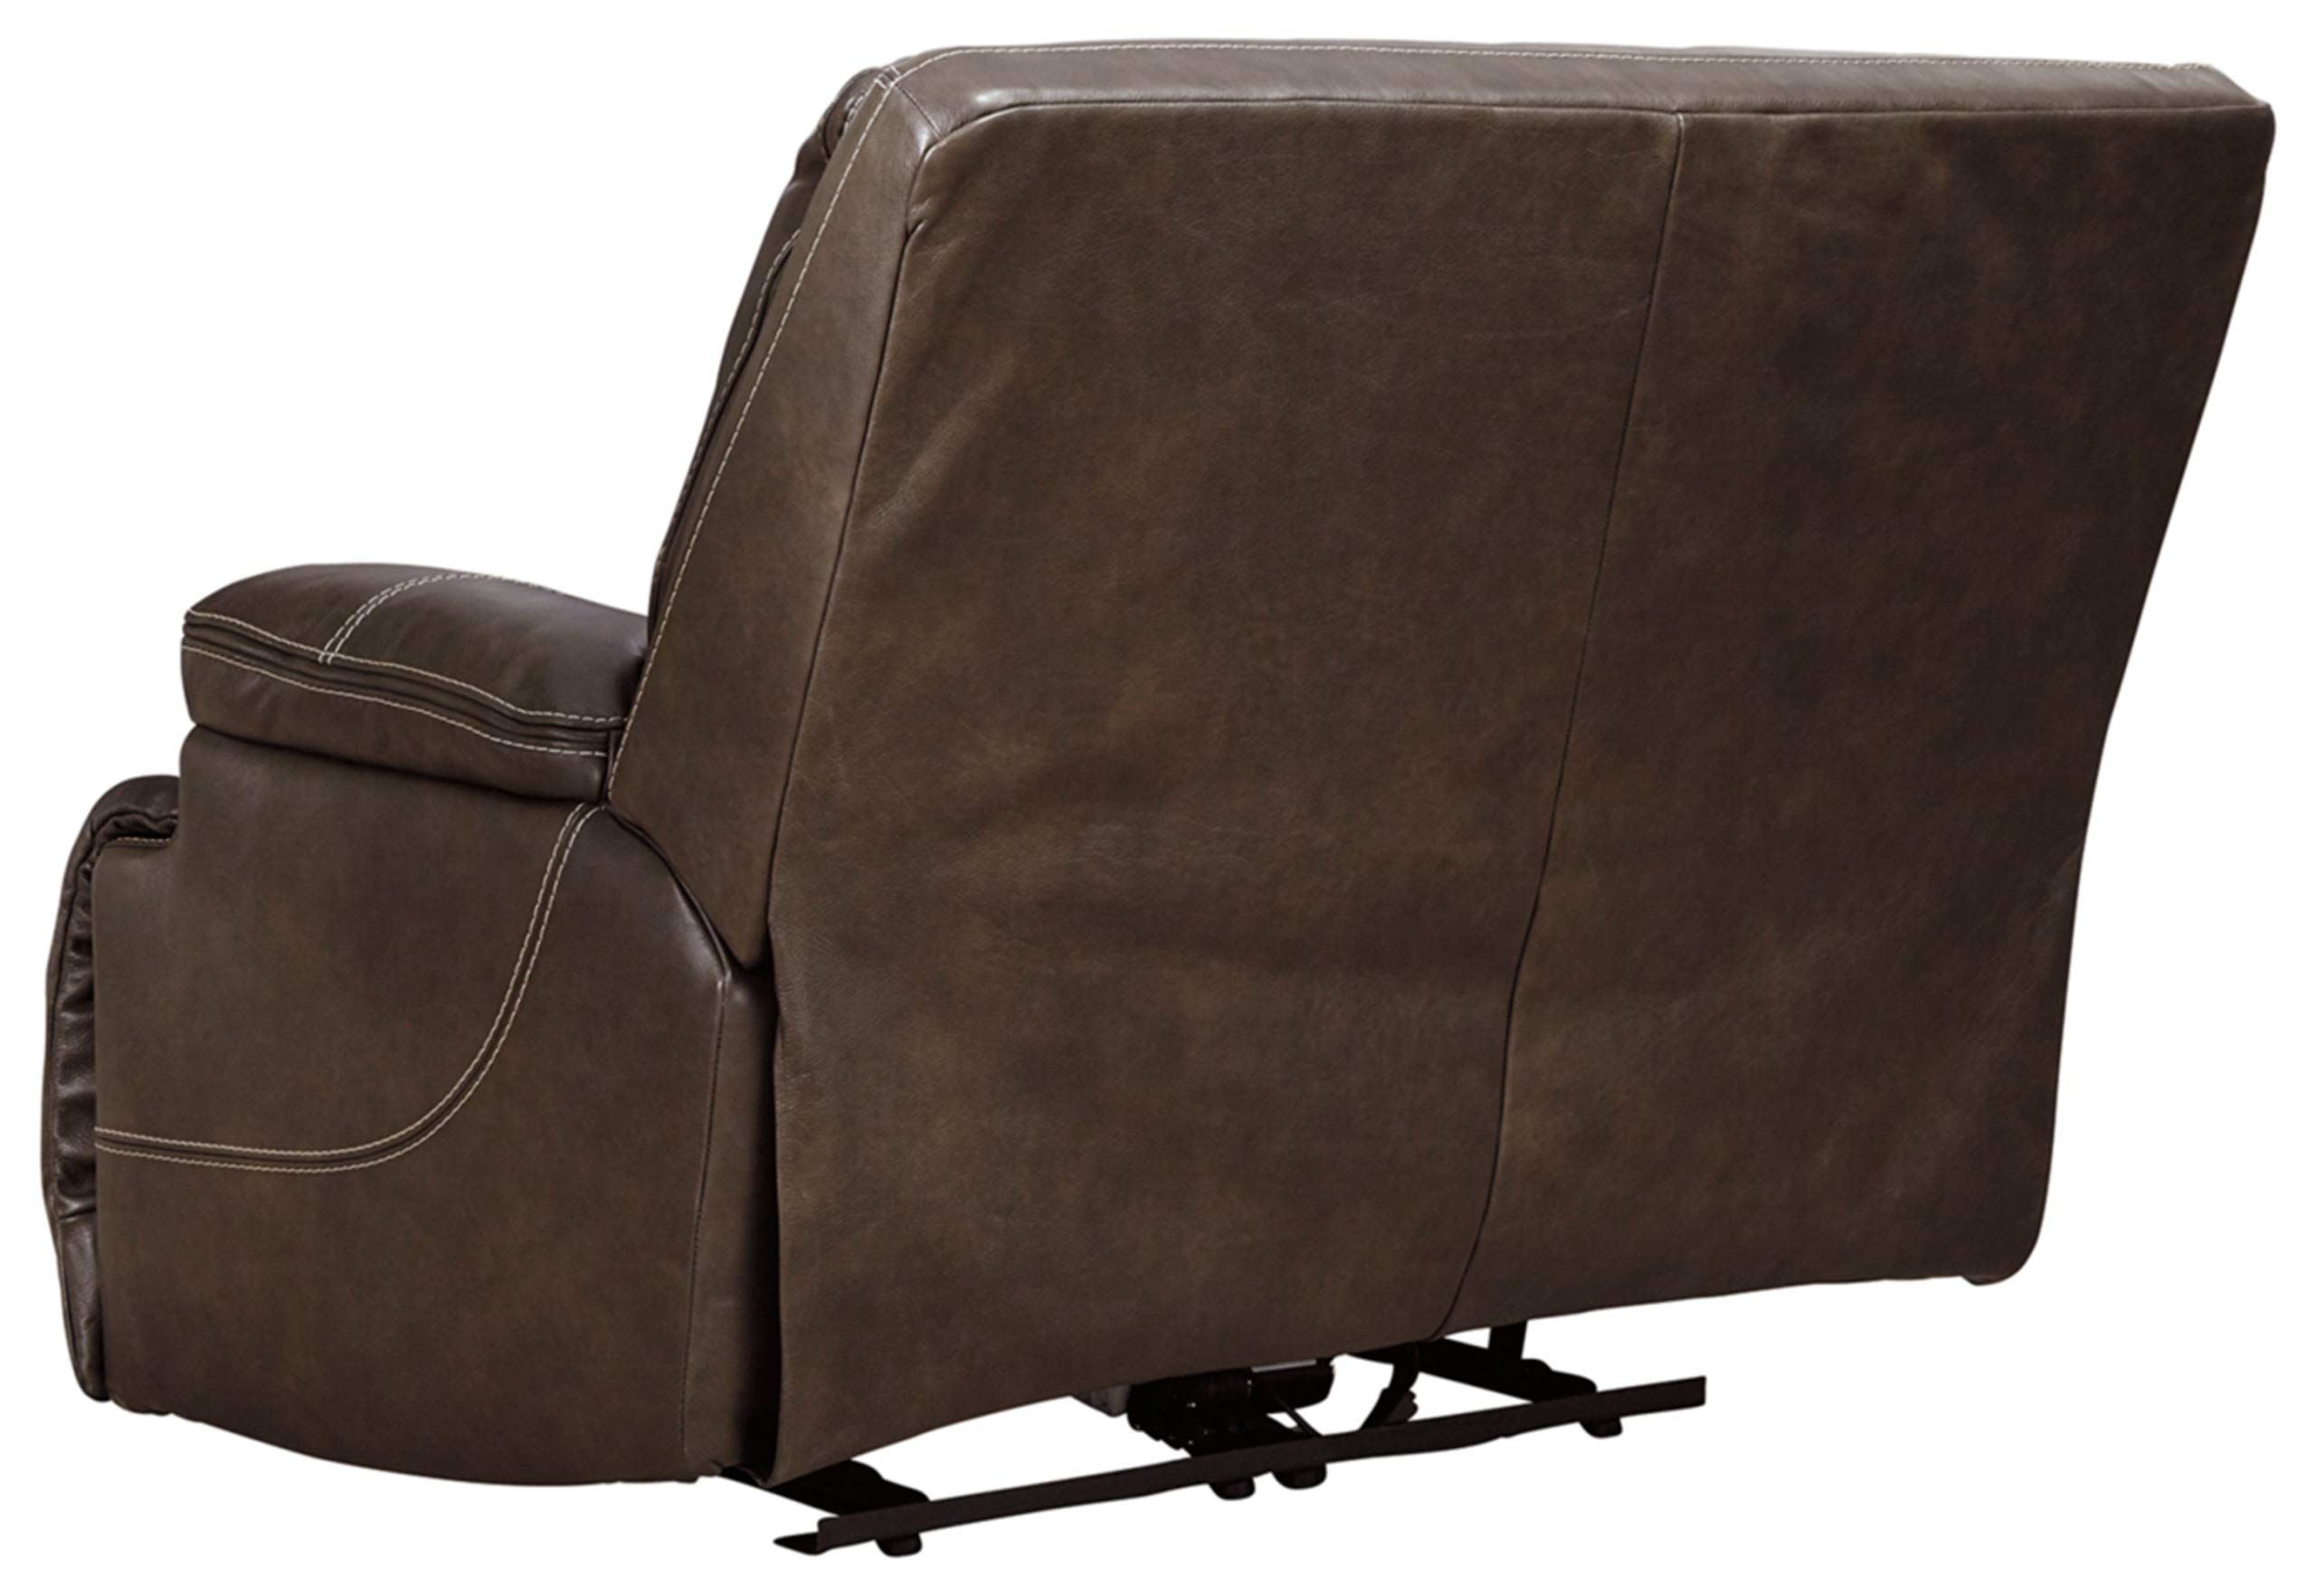 Signature Design by Ashley Ricmen Leather Adjustable Oversized Power Recliner with USB Charging, Dark Brown